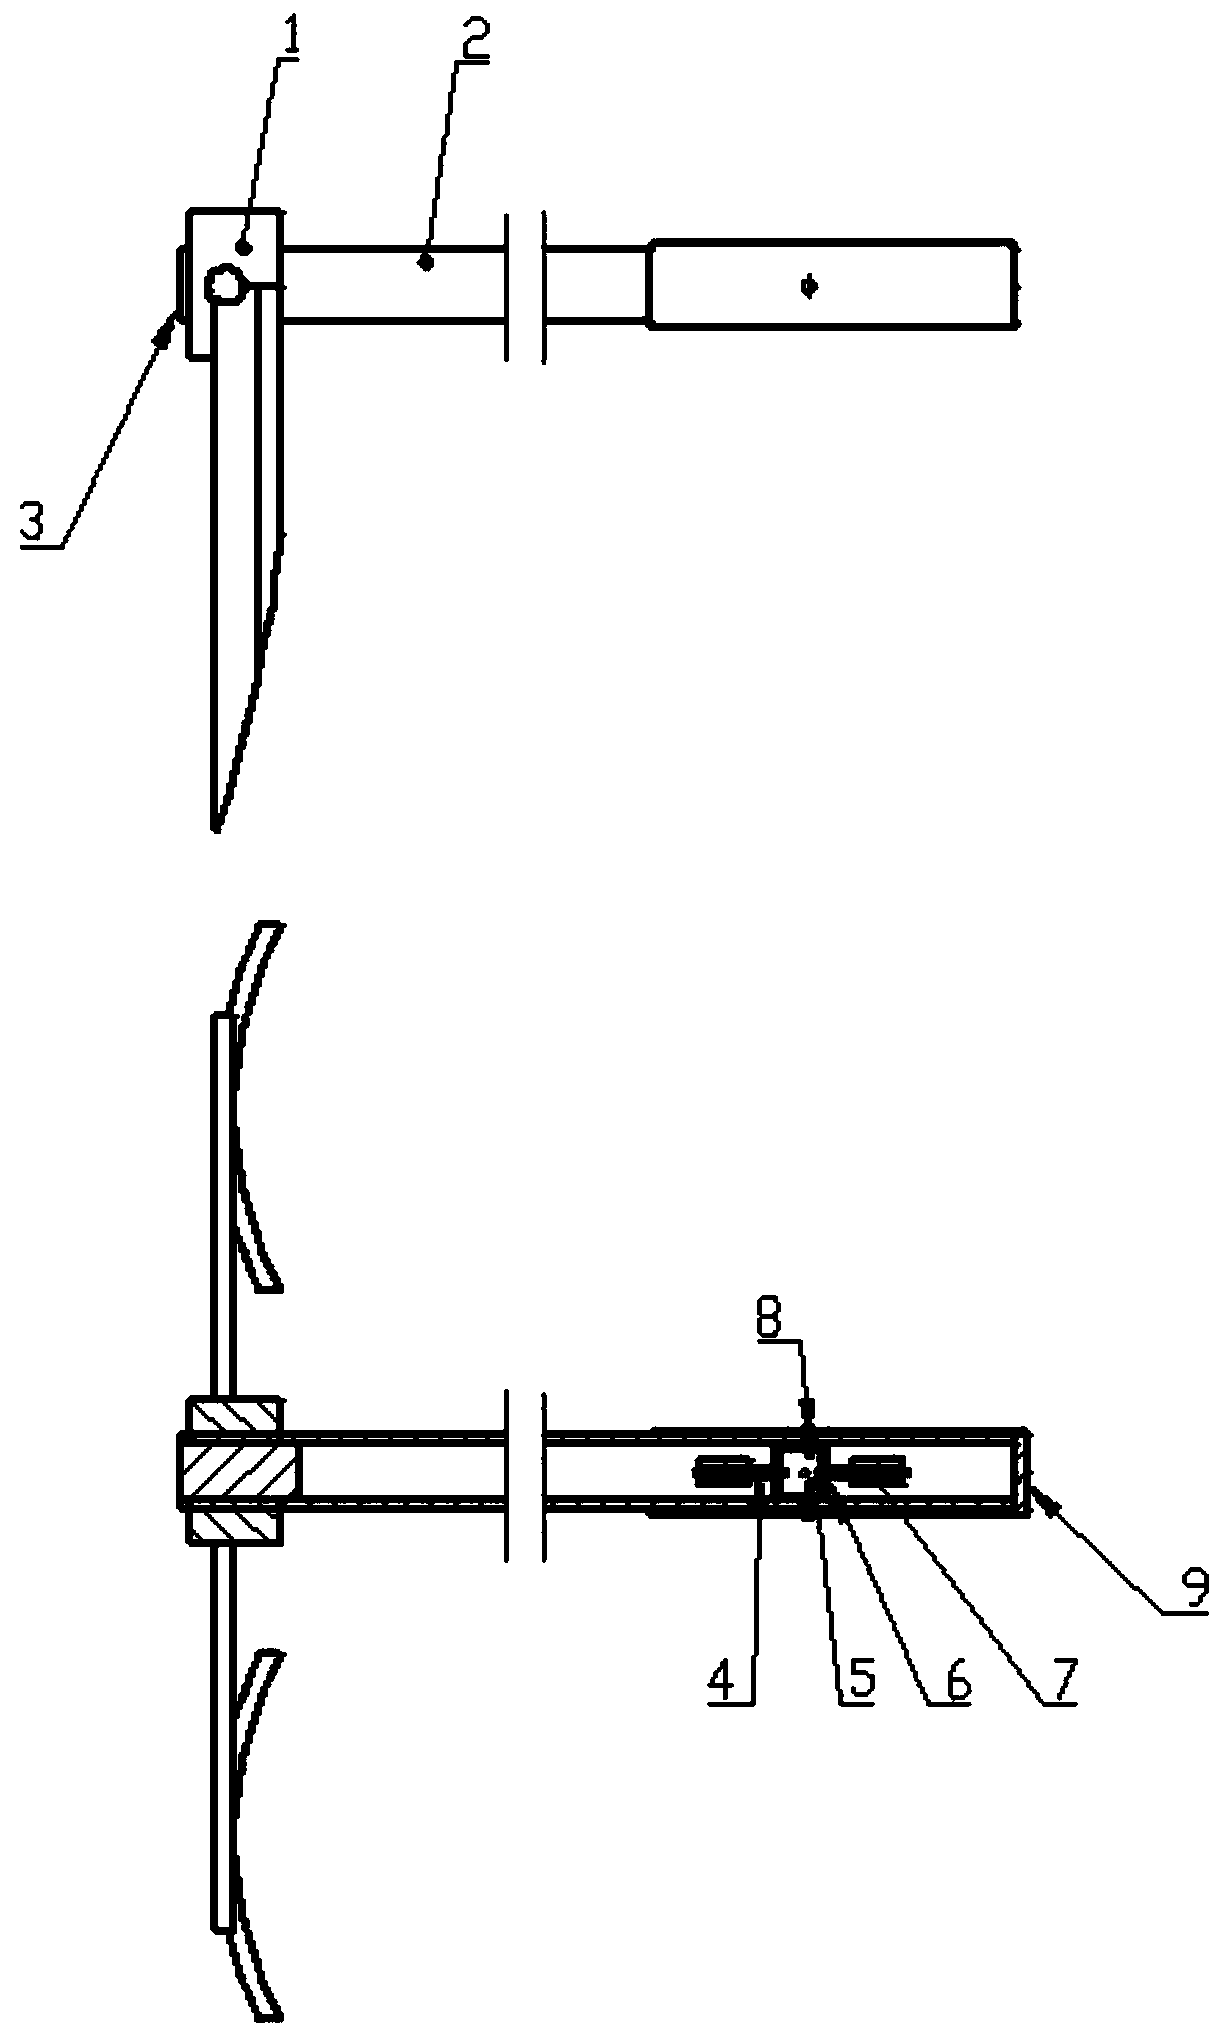 A vibration-damping double pick